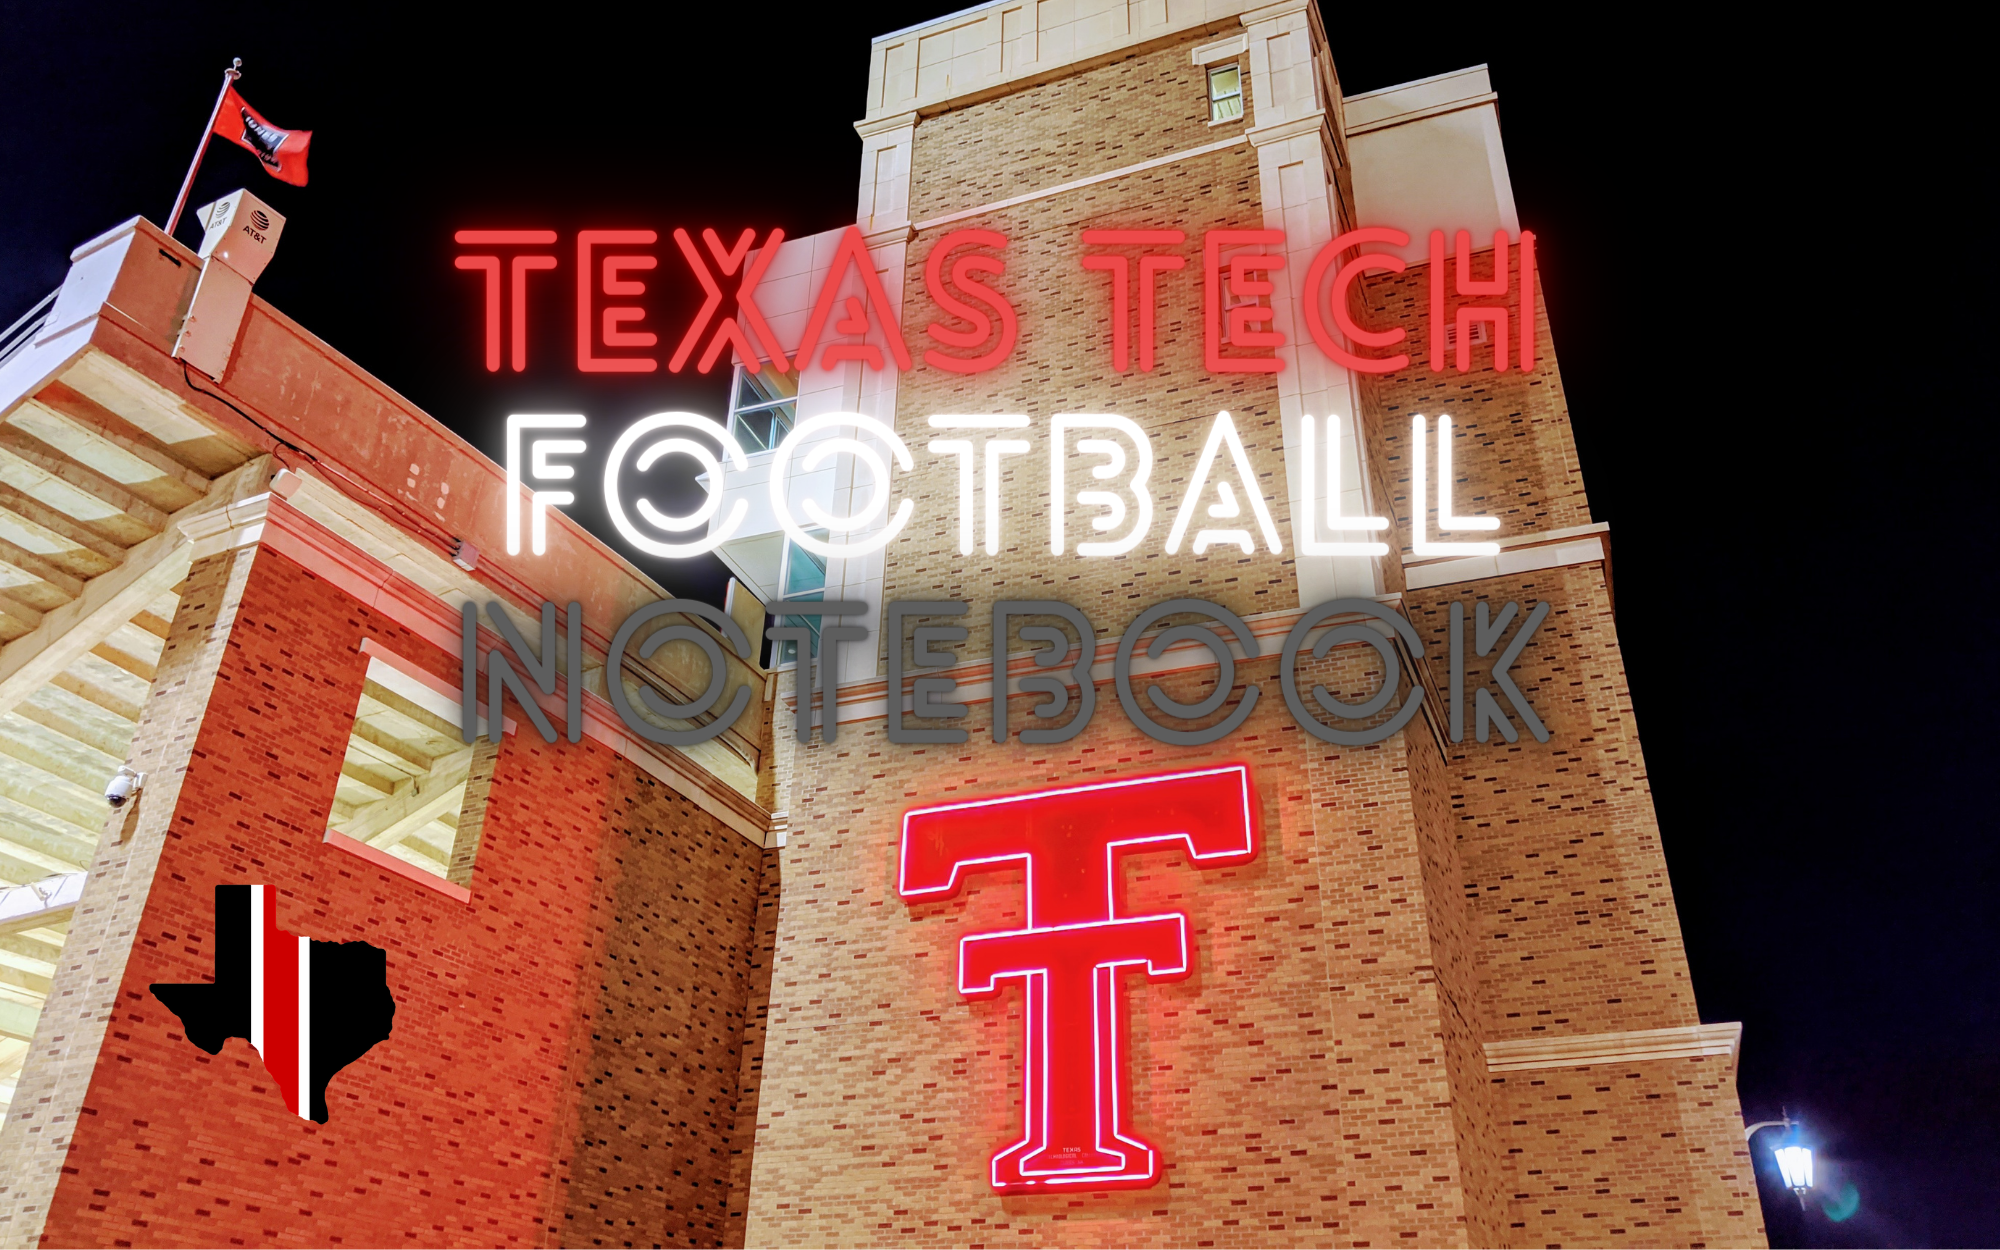 Texas Tech Football Notebook: New Names for Coaching Search